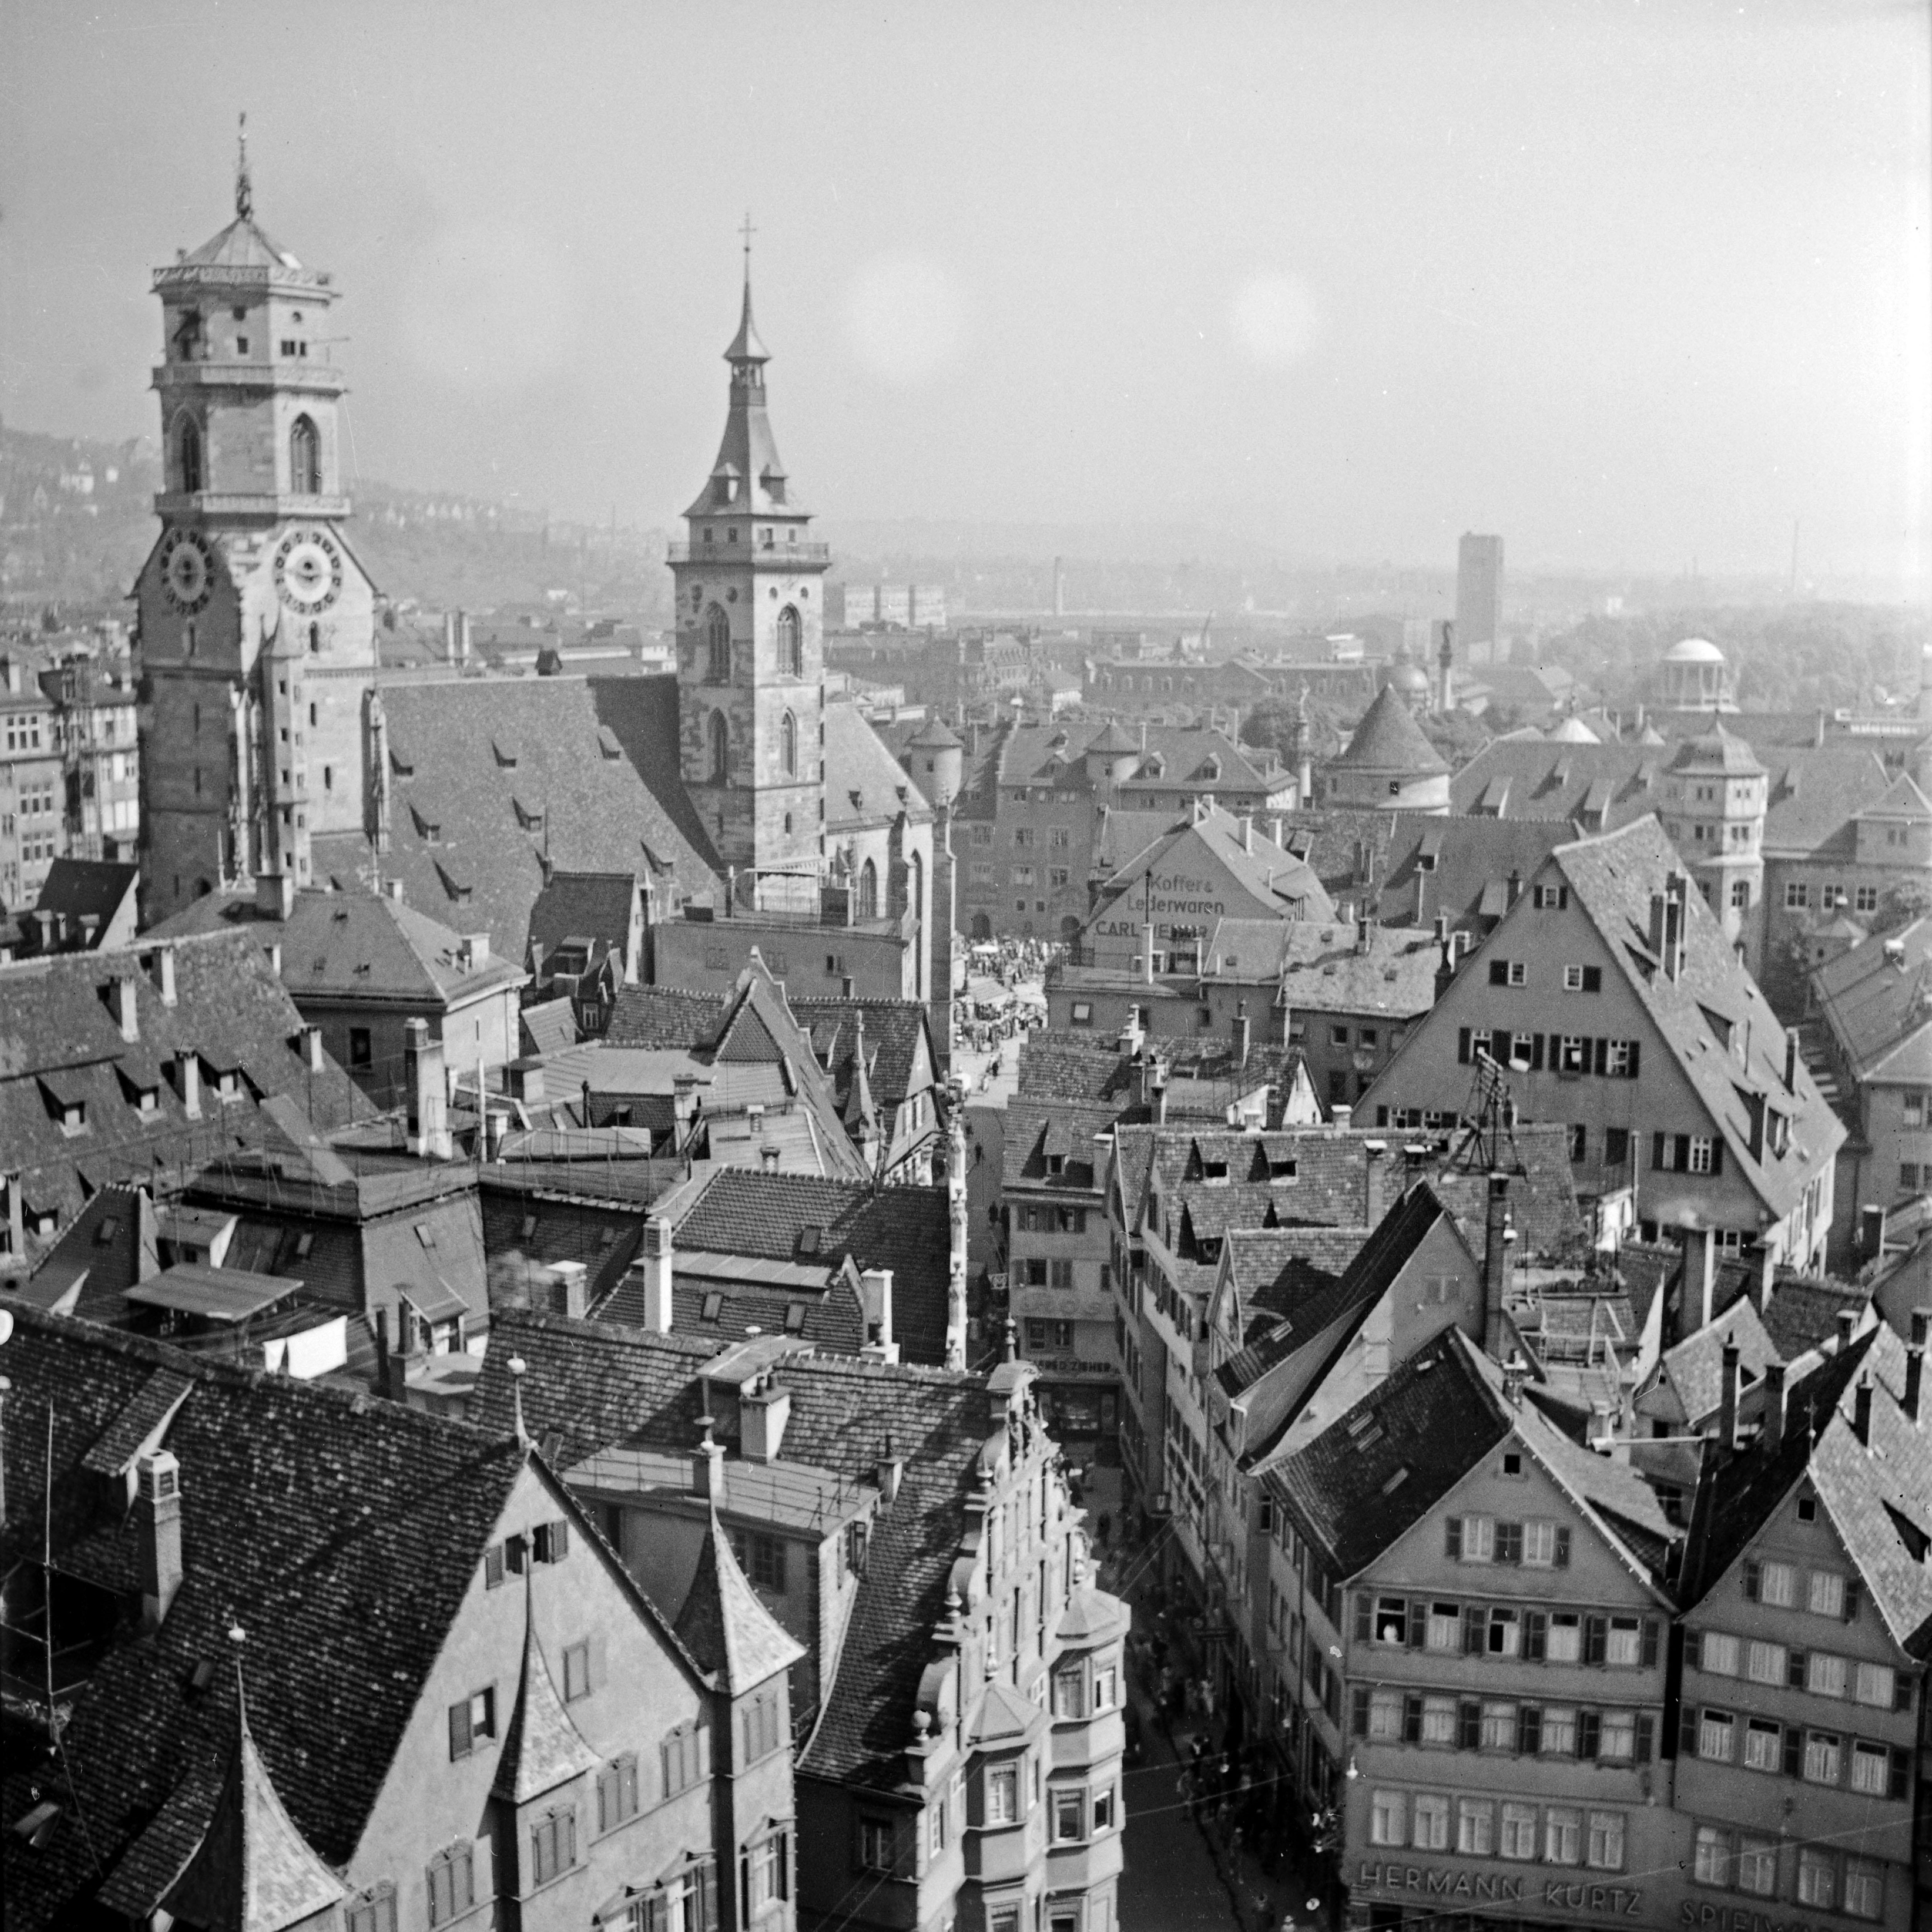 Karl Heinrich Lämmel Black and White Photograph - View from city hall belfry to old city, Stuttgart Germany 1935, Printed Later